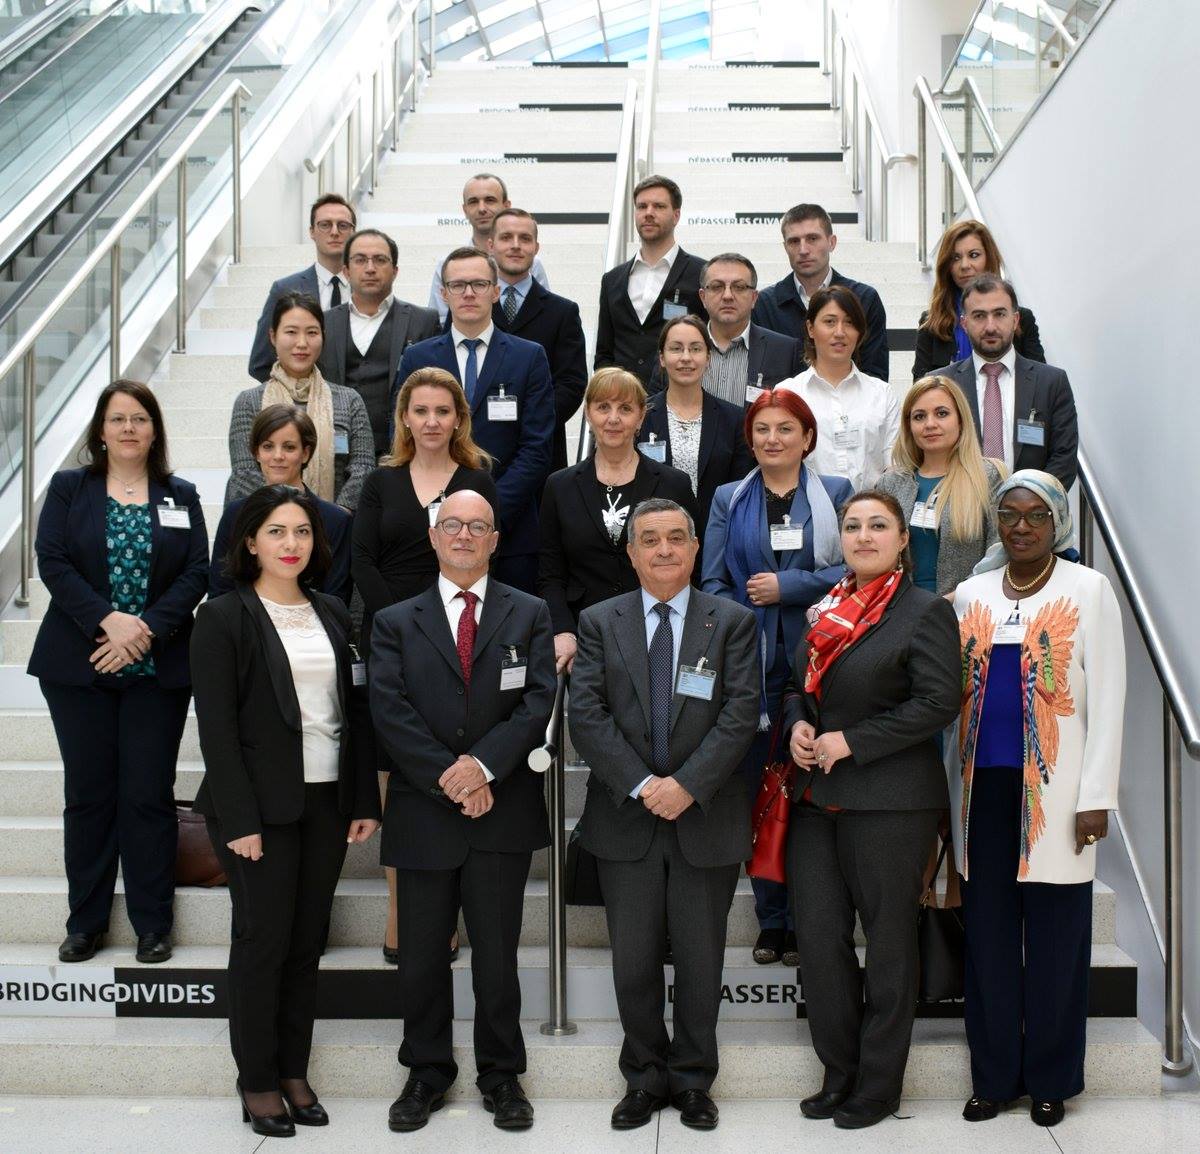 The Commission Team Participated in the International Workshop of the Network for Integrity